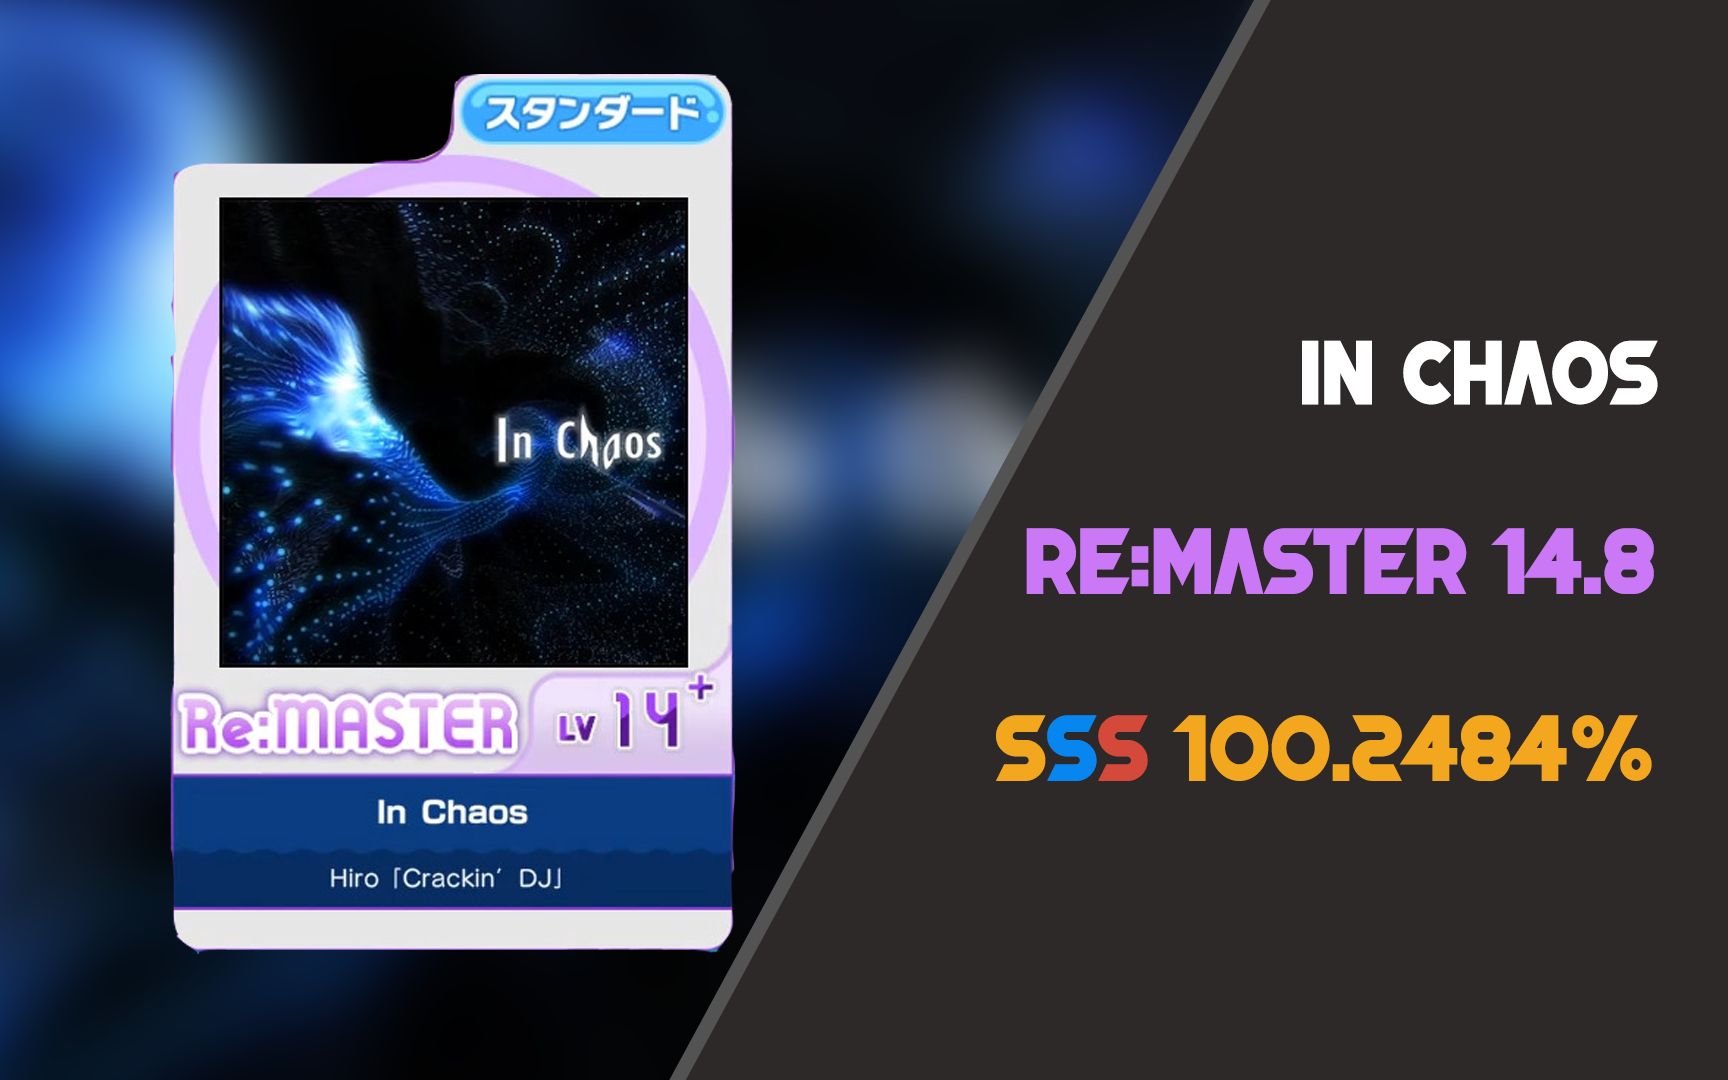 【maimai】In Chaos 阴间超市 SSS 100.2484% [Re:Master 14+]